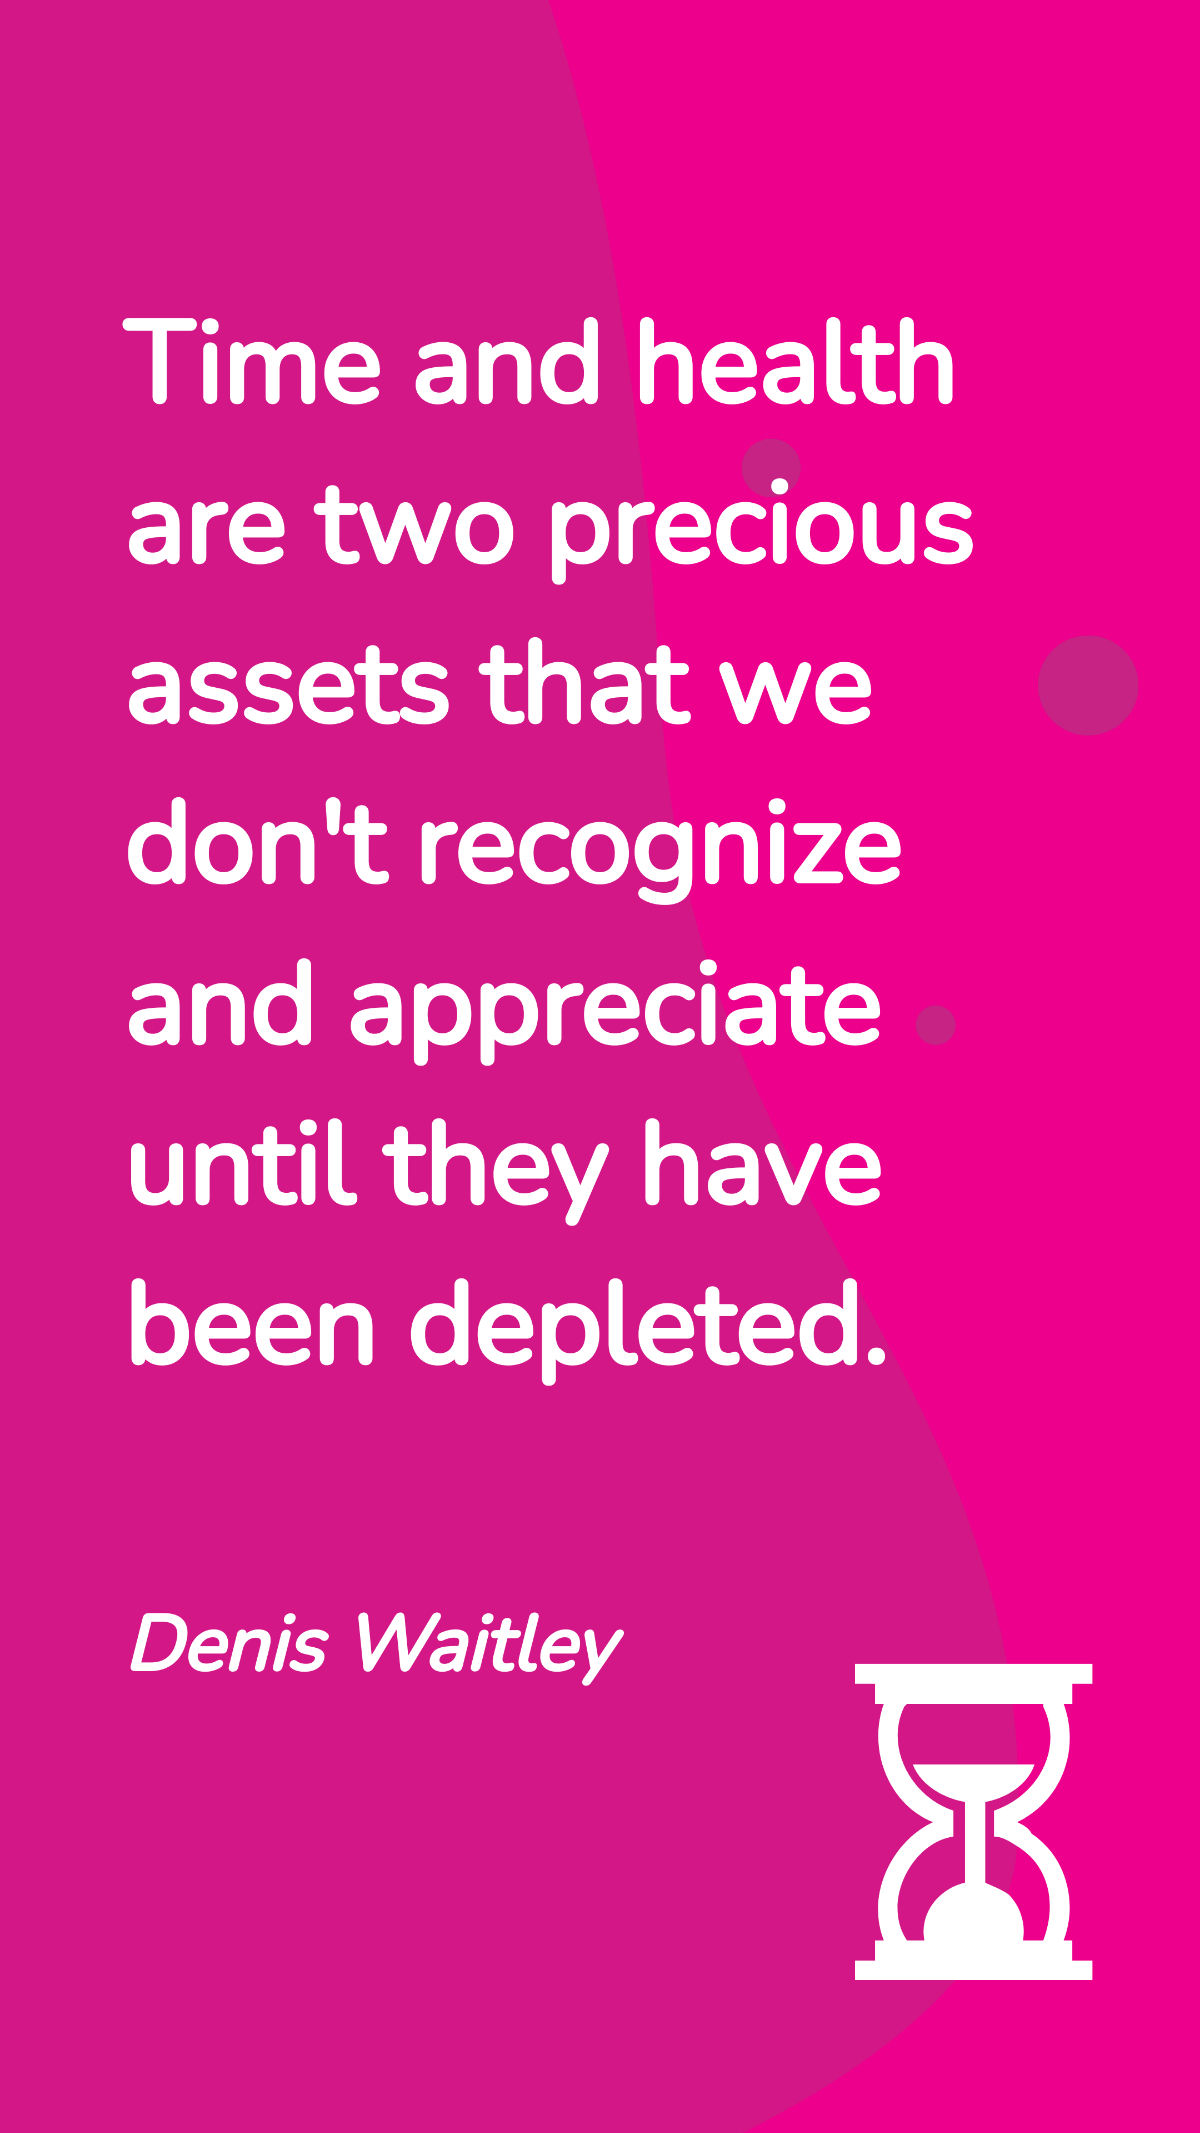 Free Denis Waitley - Time and health are two precious assets that we don't recognize and appreciate until they have been depleted. Template